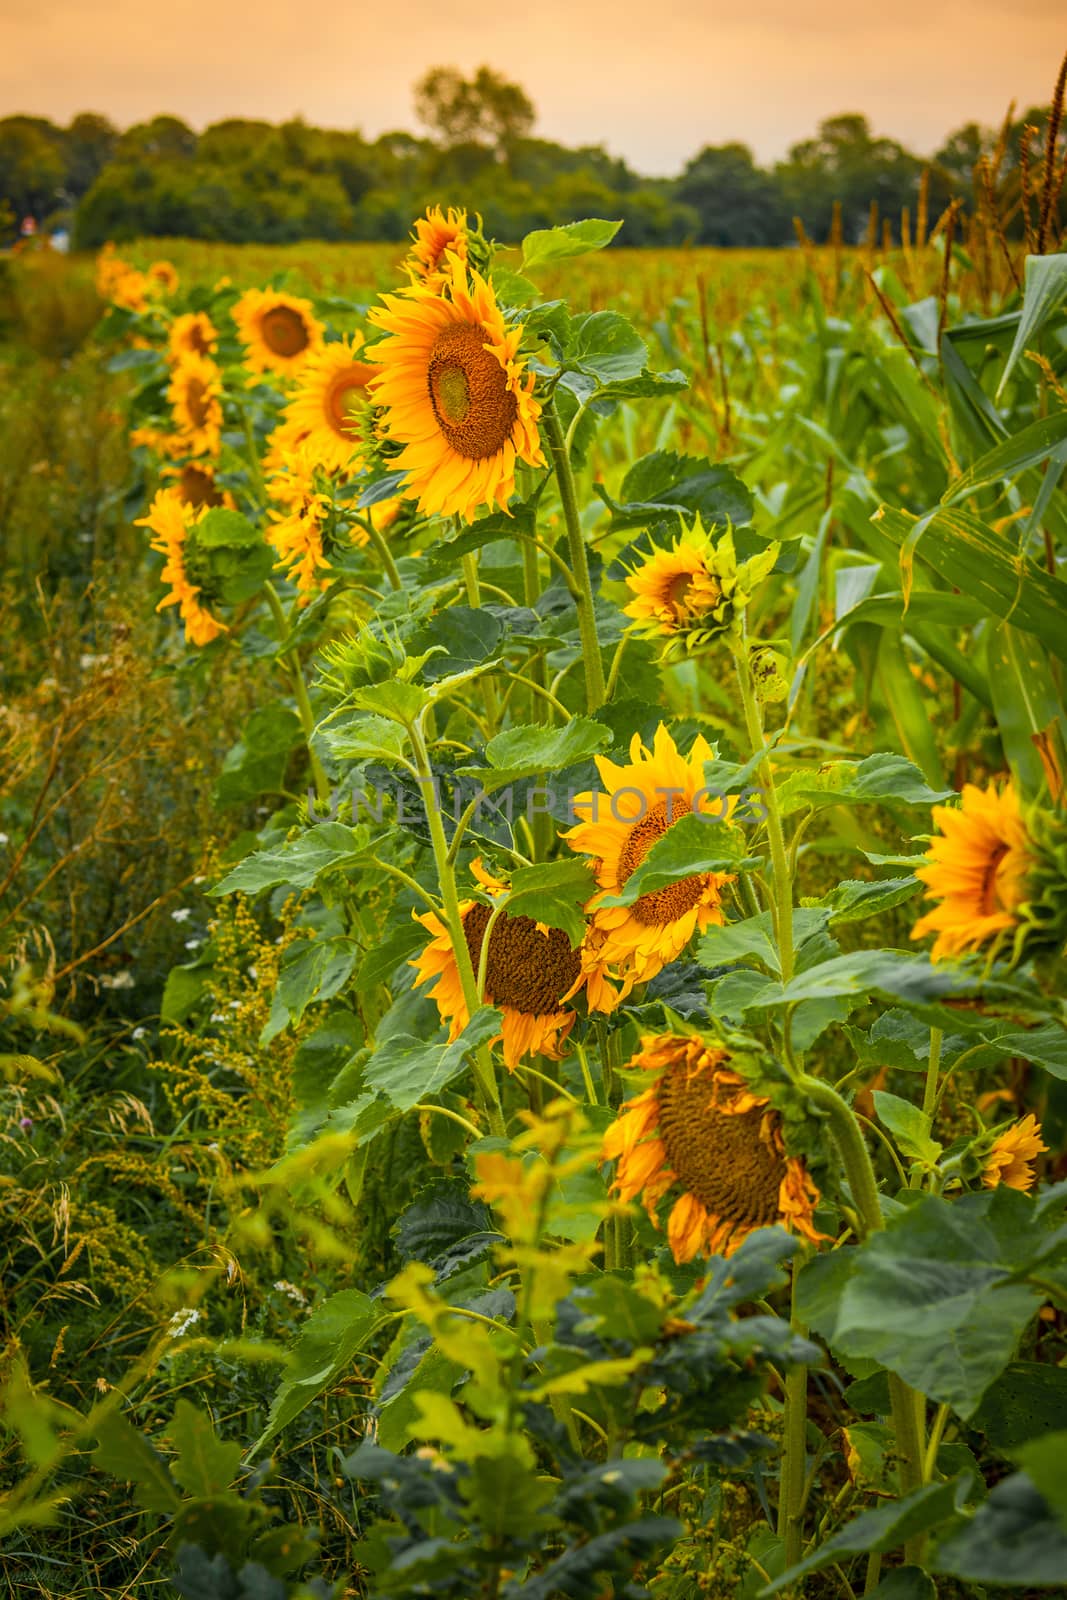 Sunflowers on a green field by Sportactive